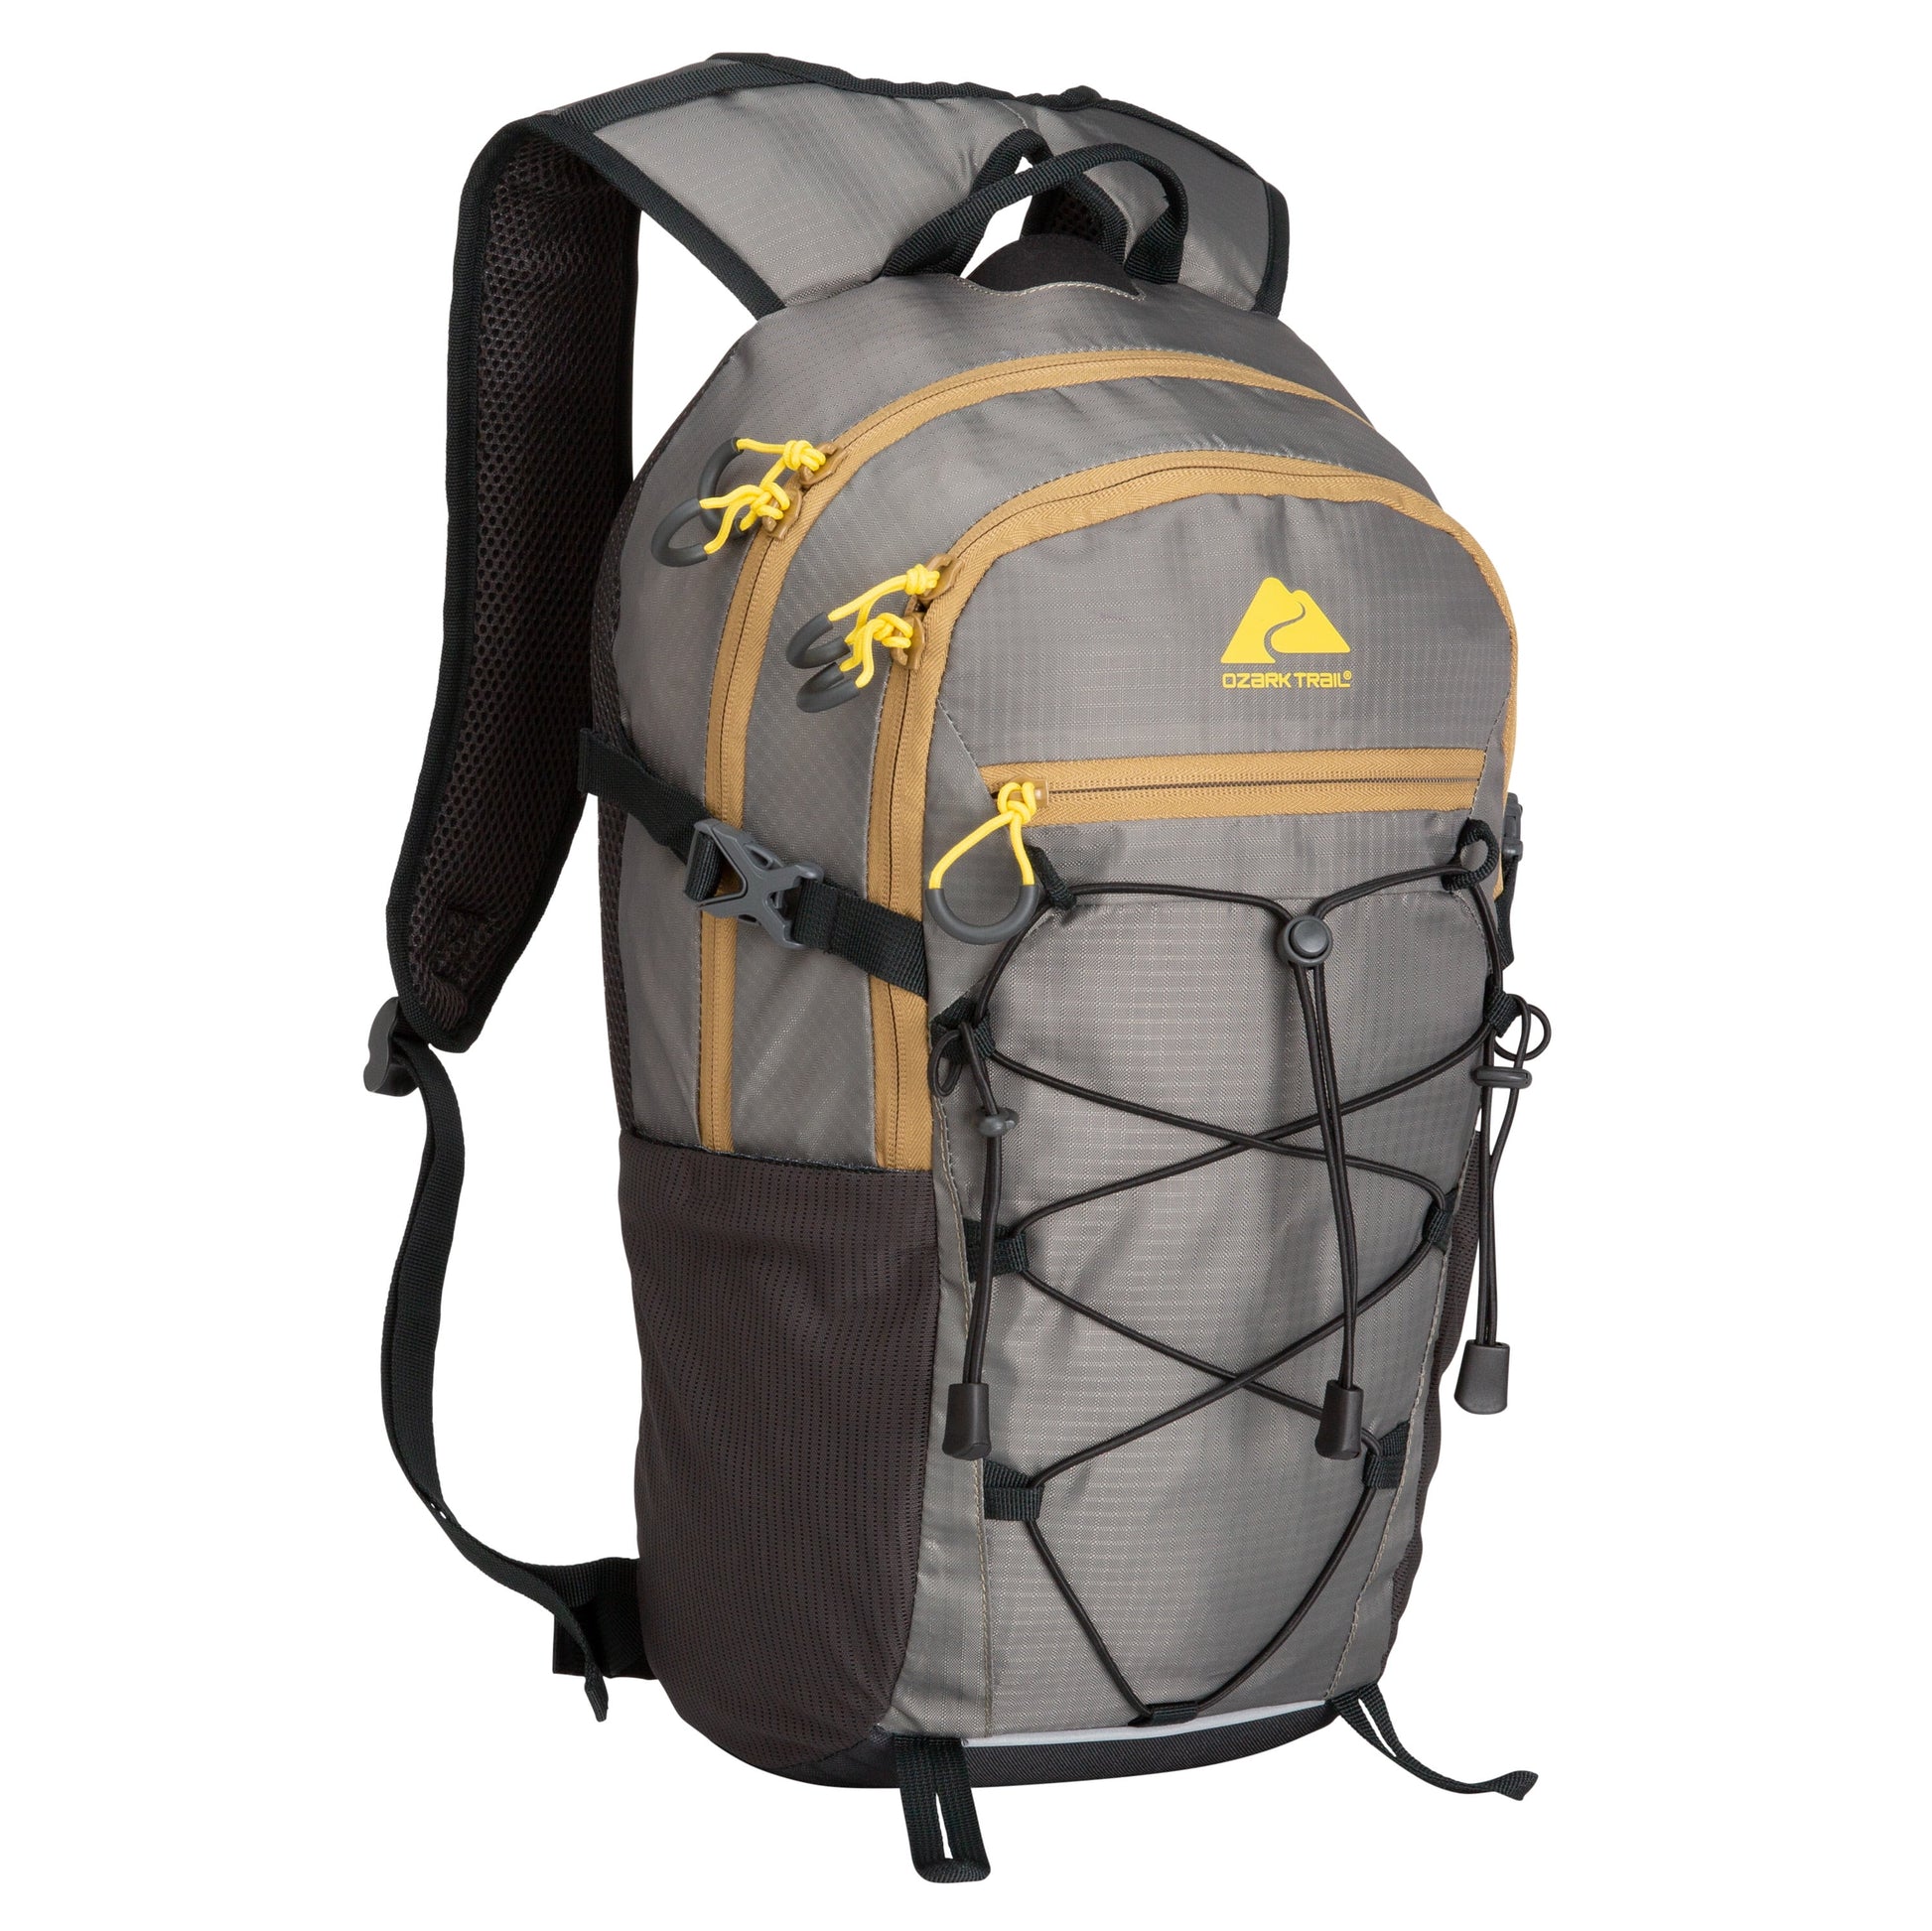 17 L Camping, Hiking, Mountaineering, Technical Backpack, Gray, Unisex